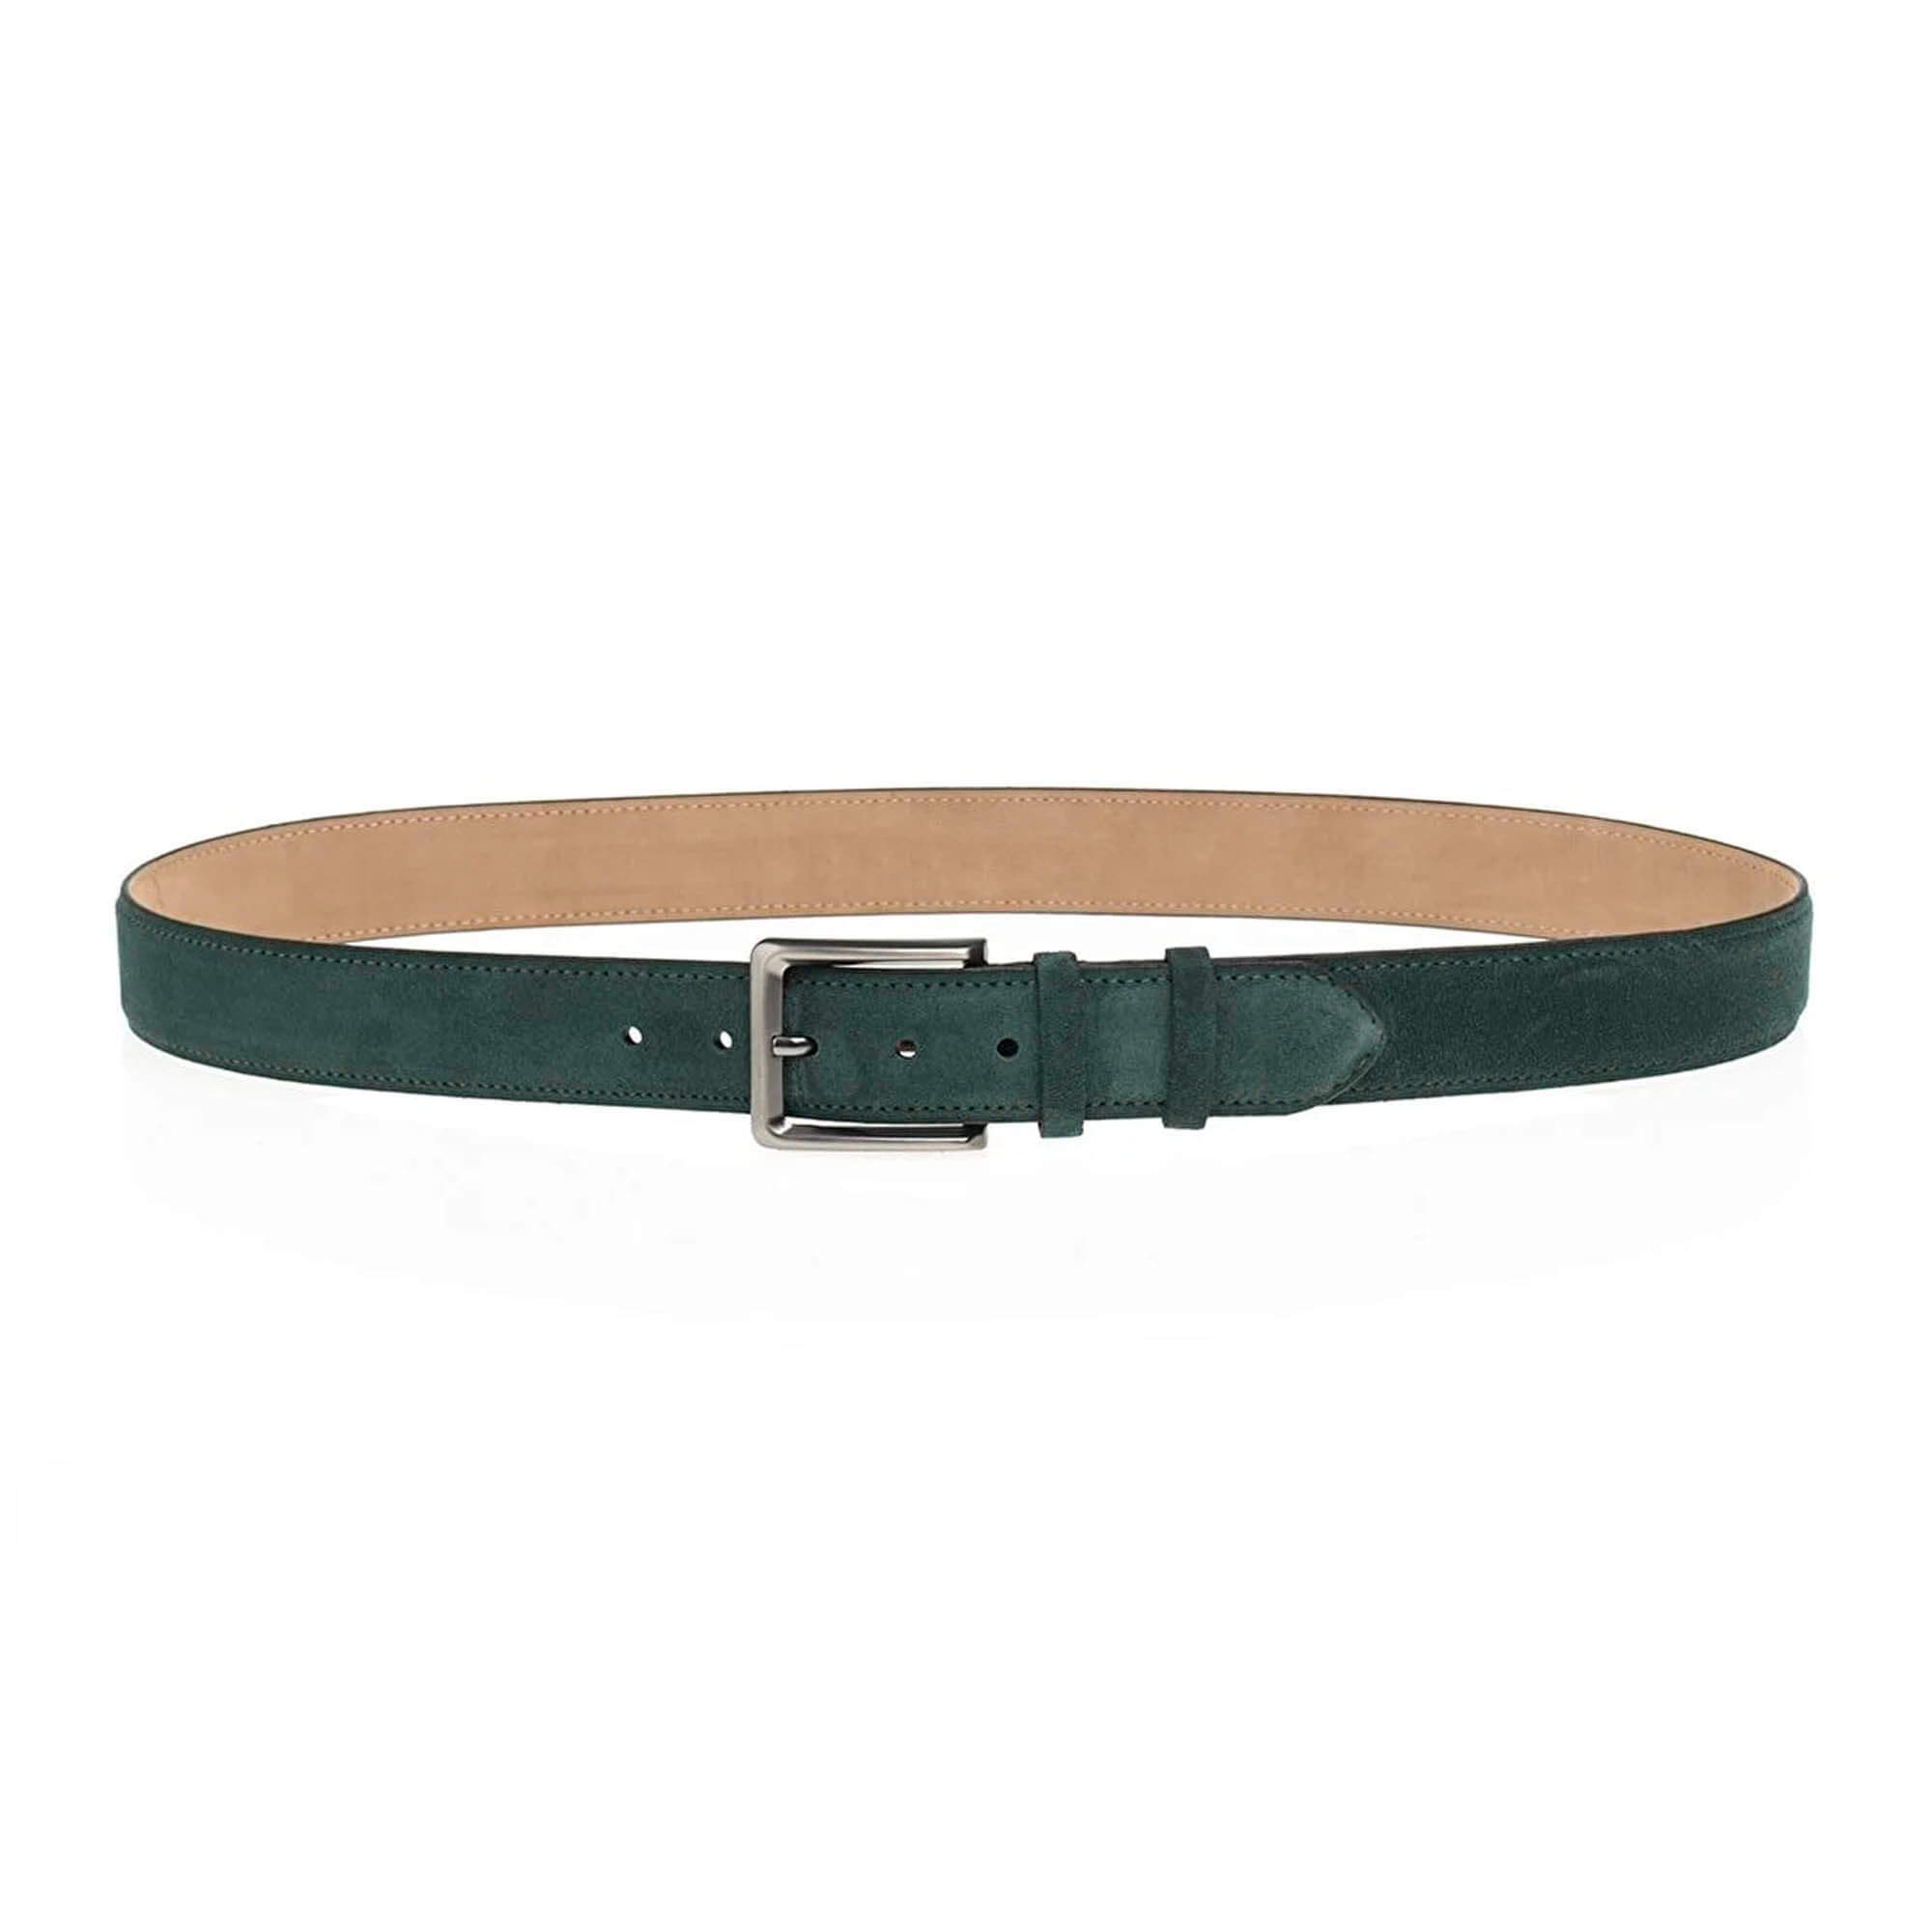 Emerald Green Suede Belt Quality Genuine Leather